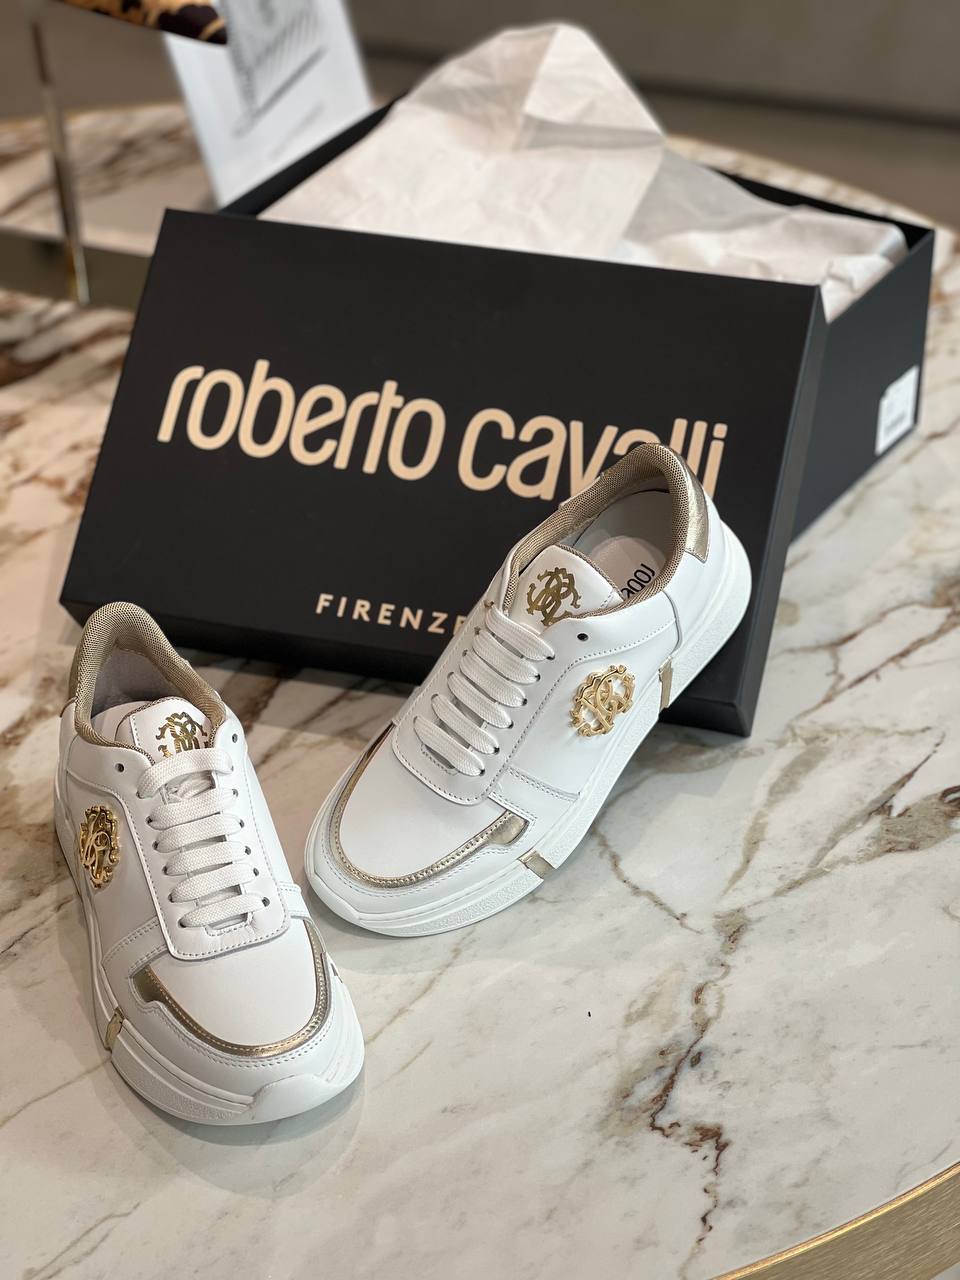 Roberto Cavalli Outlets 4424